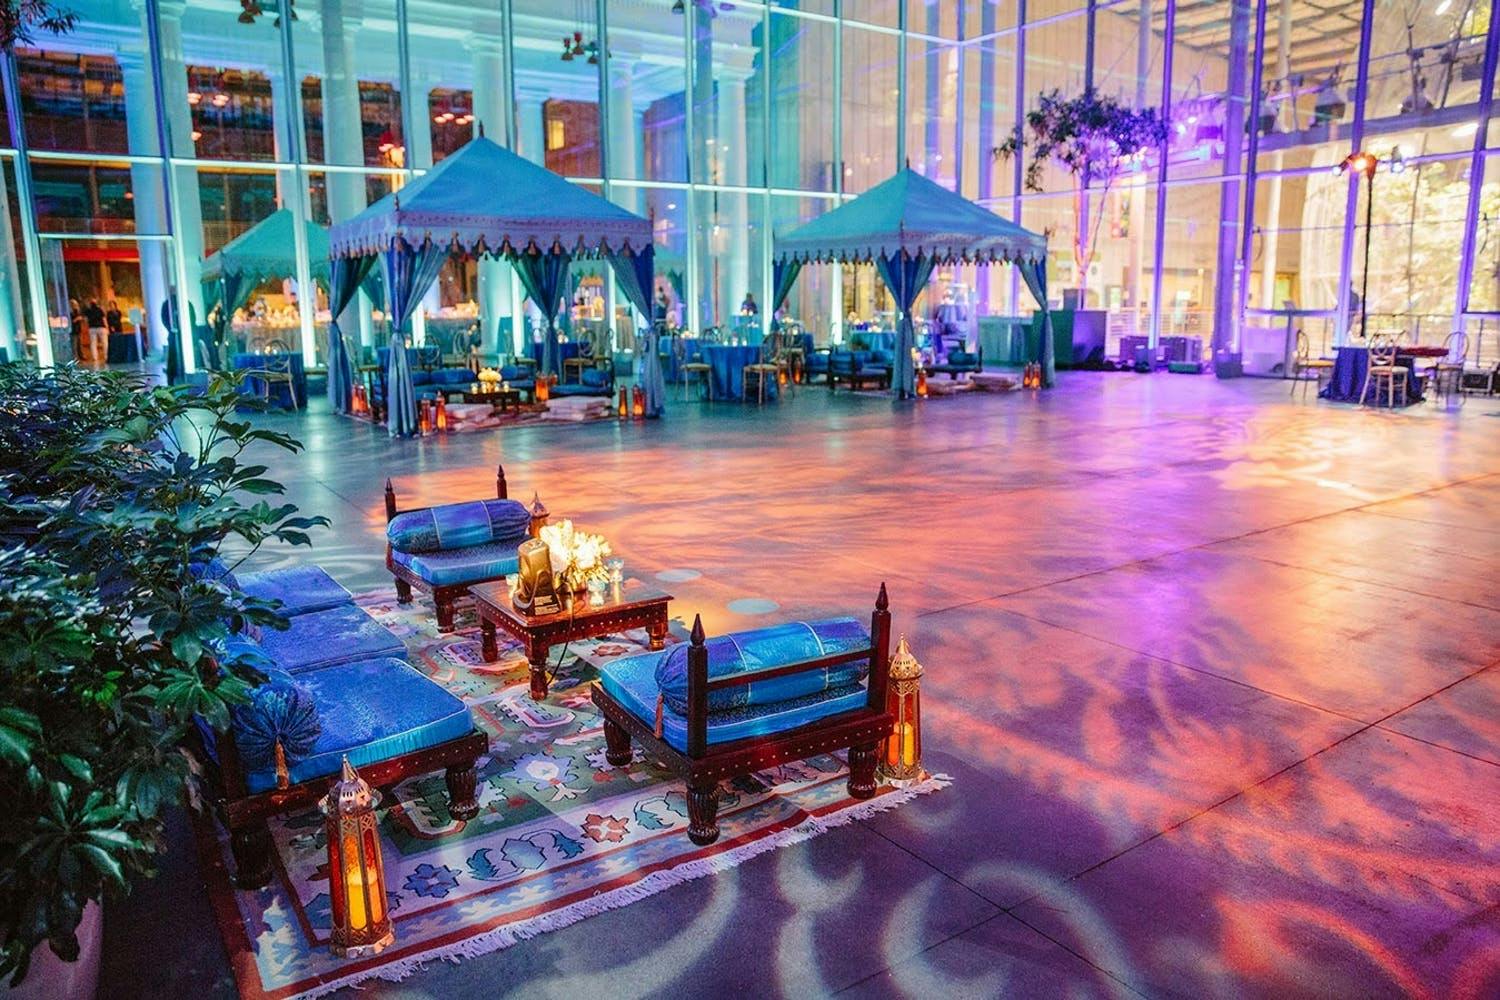 Persian-Indian welcome party with teal pergola tents and purple lighting | PartySlate